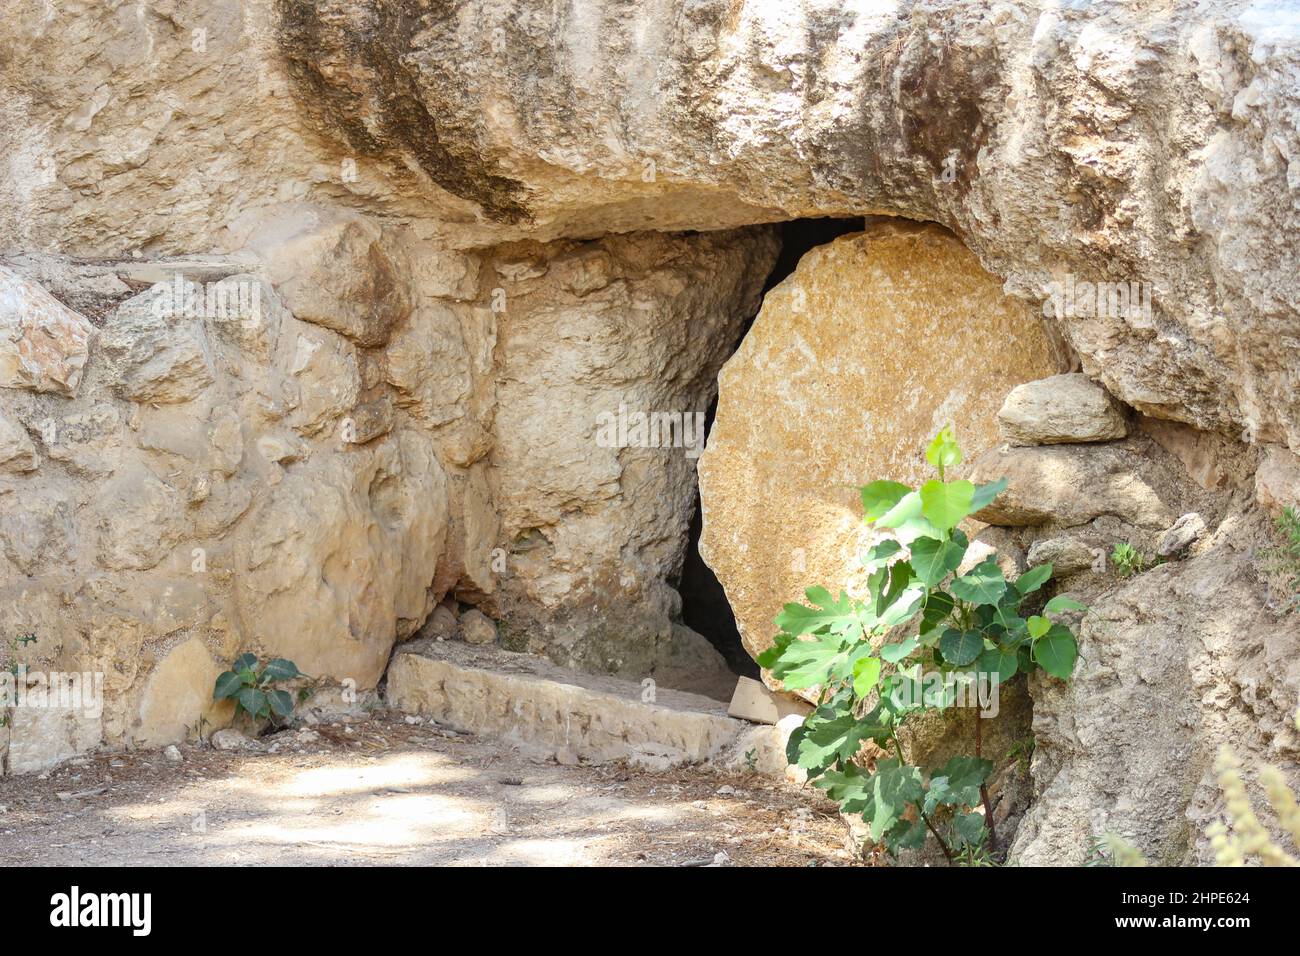 A stone blocks entry into a replica of Jesus' tomb at the Nazareth Village Open Air Museum in Nazareth, Israel. Stock Photo